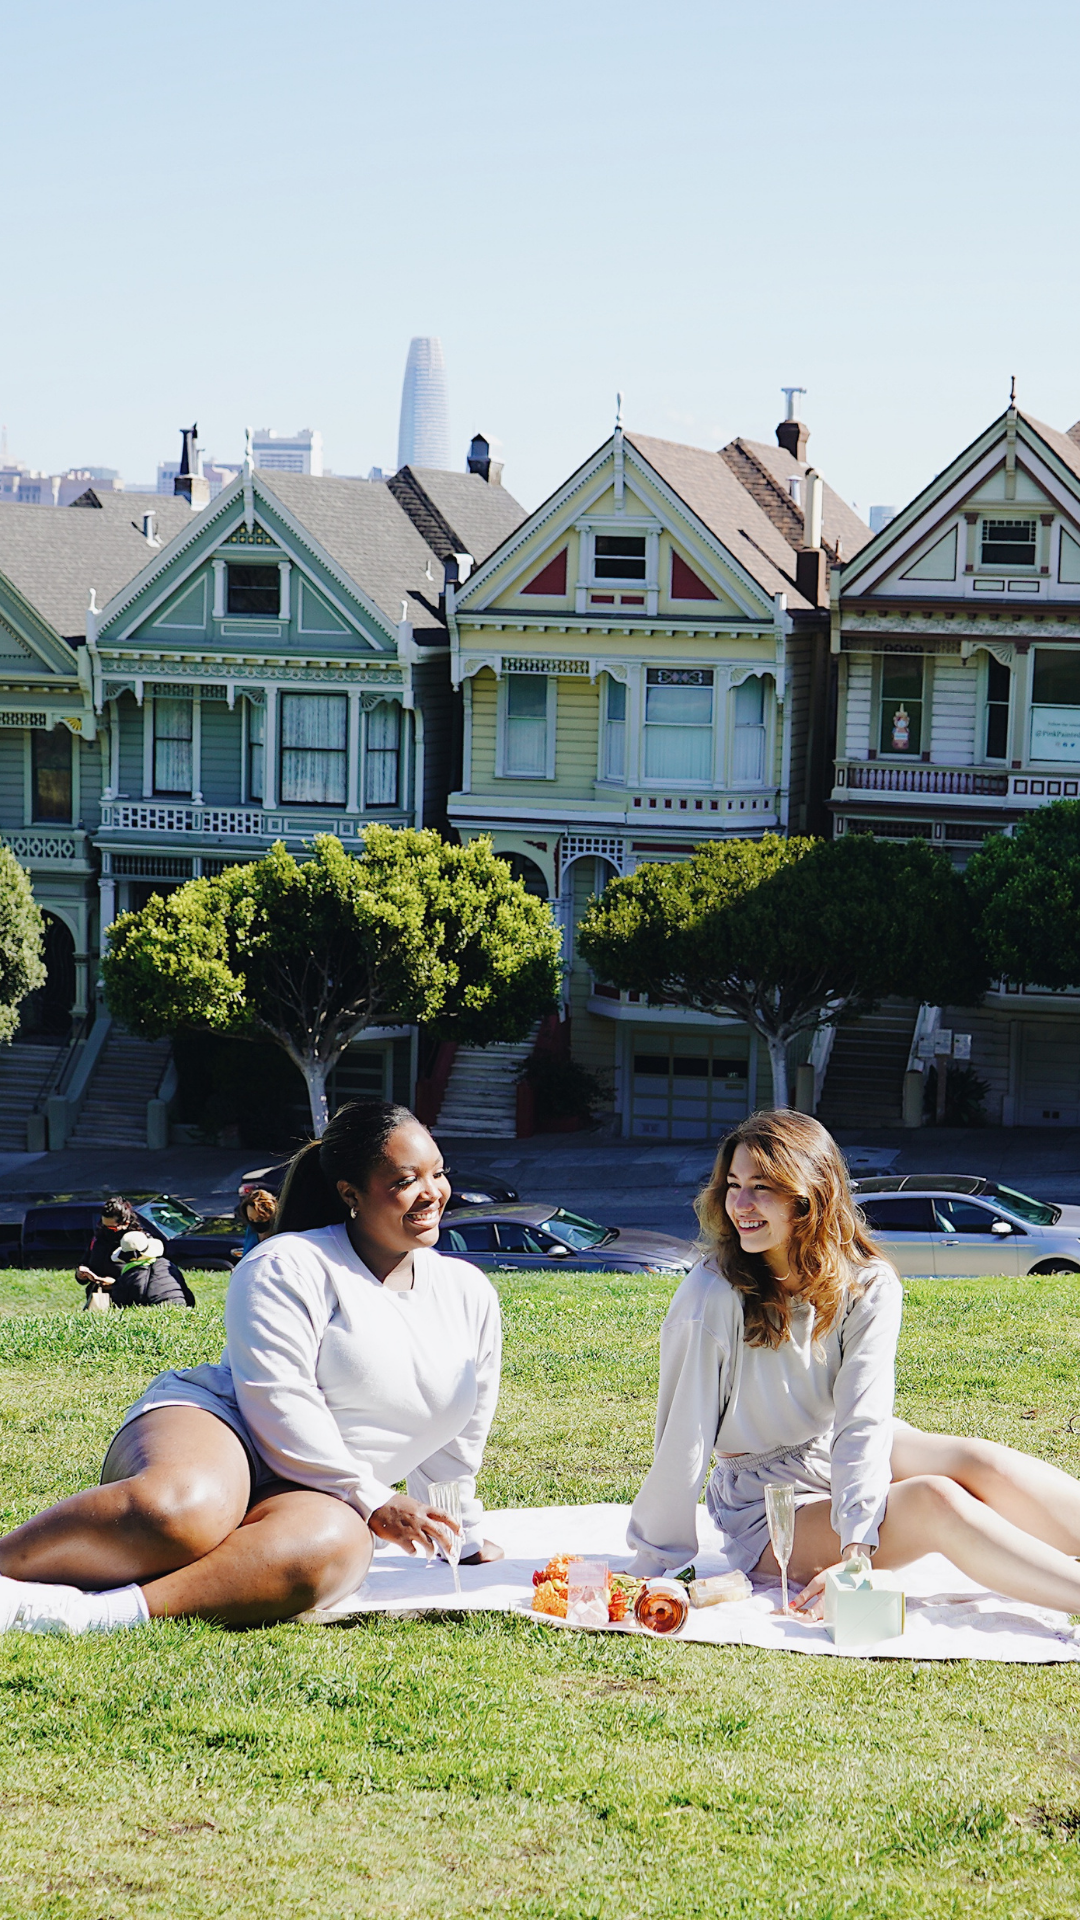 A portrait orientation of the two young women, Taysia and Kiara, Asian and Black, are wearing the Fog Grey colored Sweatshorts and Cropped Sweatshirt. They are looking at each other and sitting on the lawn blanket in front of the Painted Ladies. 